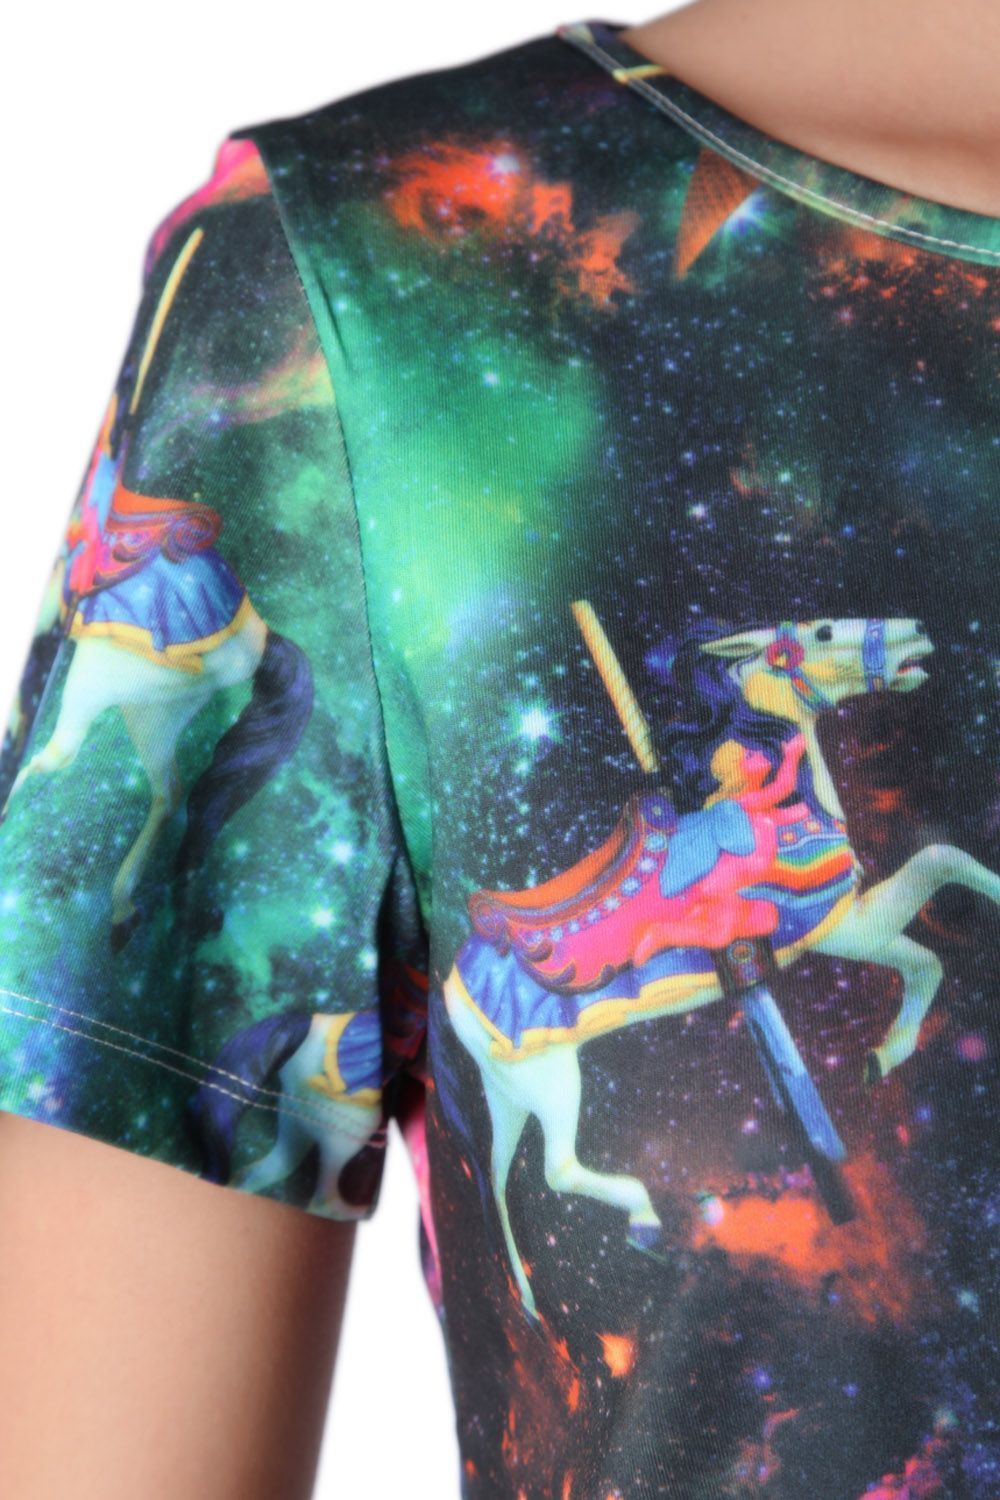 Crop Top With Illustrated Print